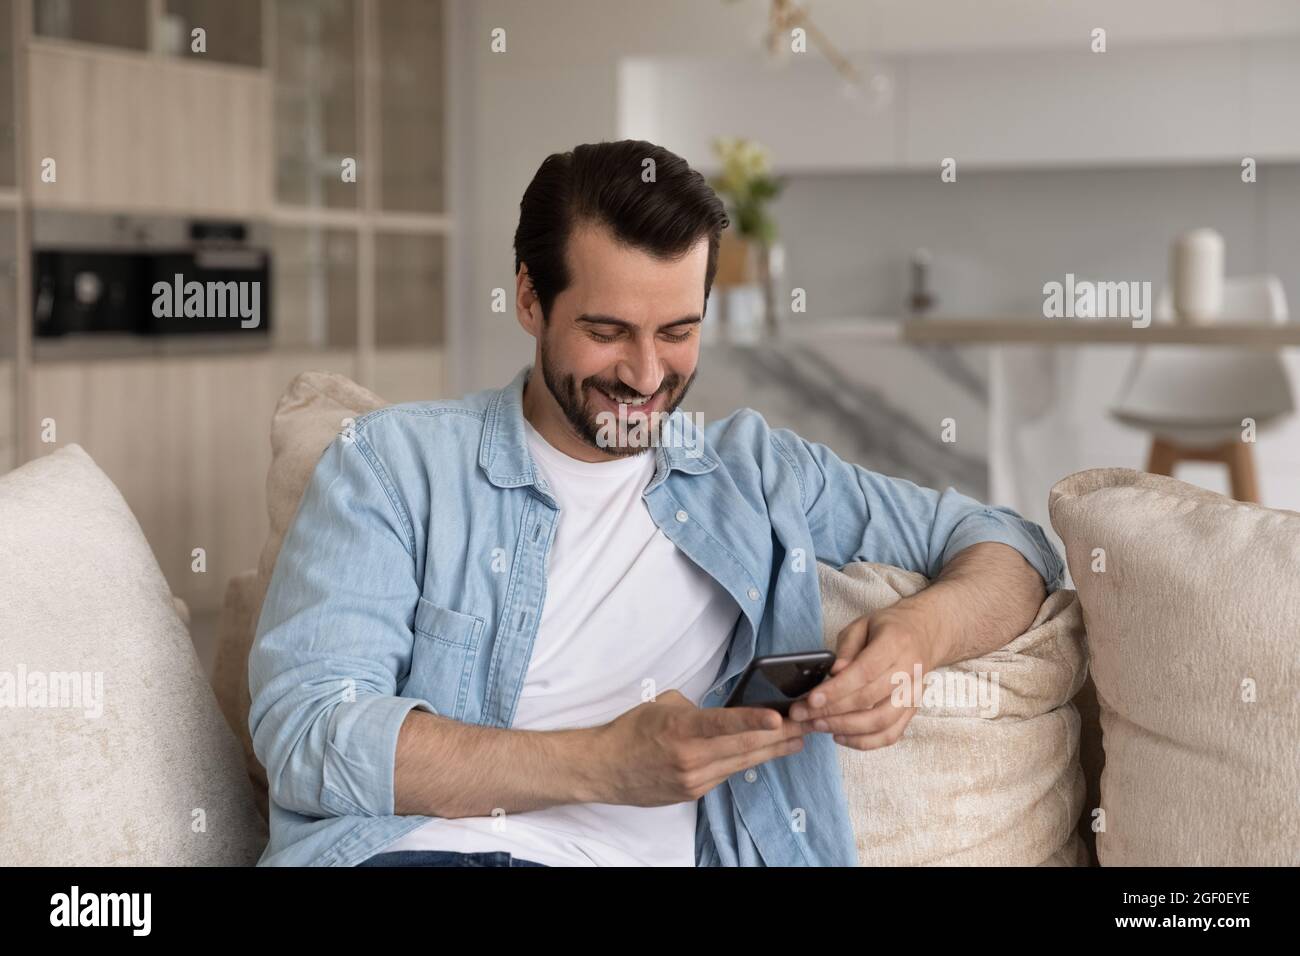 Happy cellphone user getting good news, reading text message Stock Photo